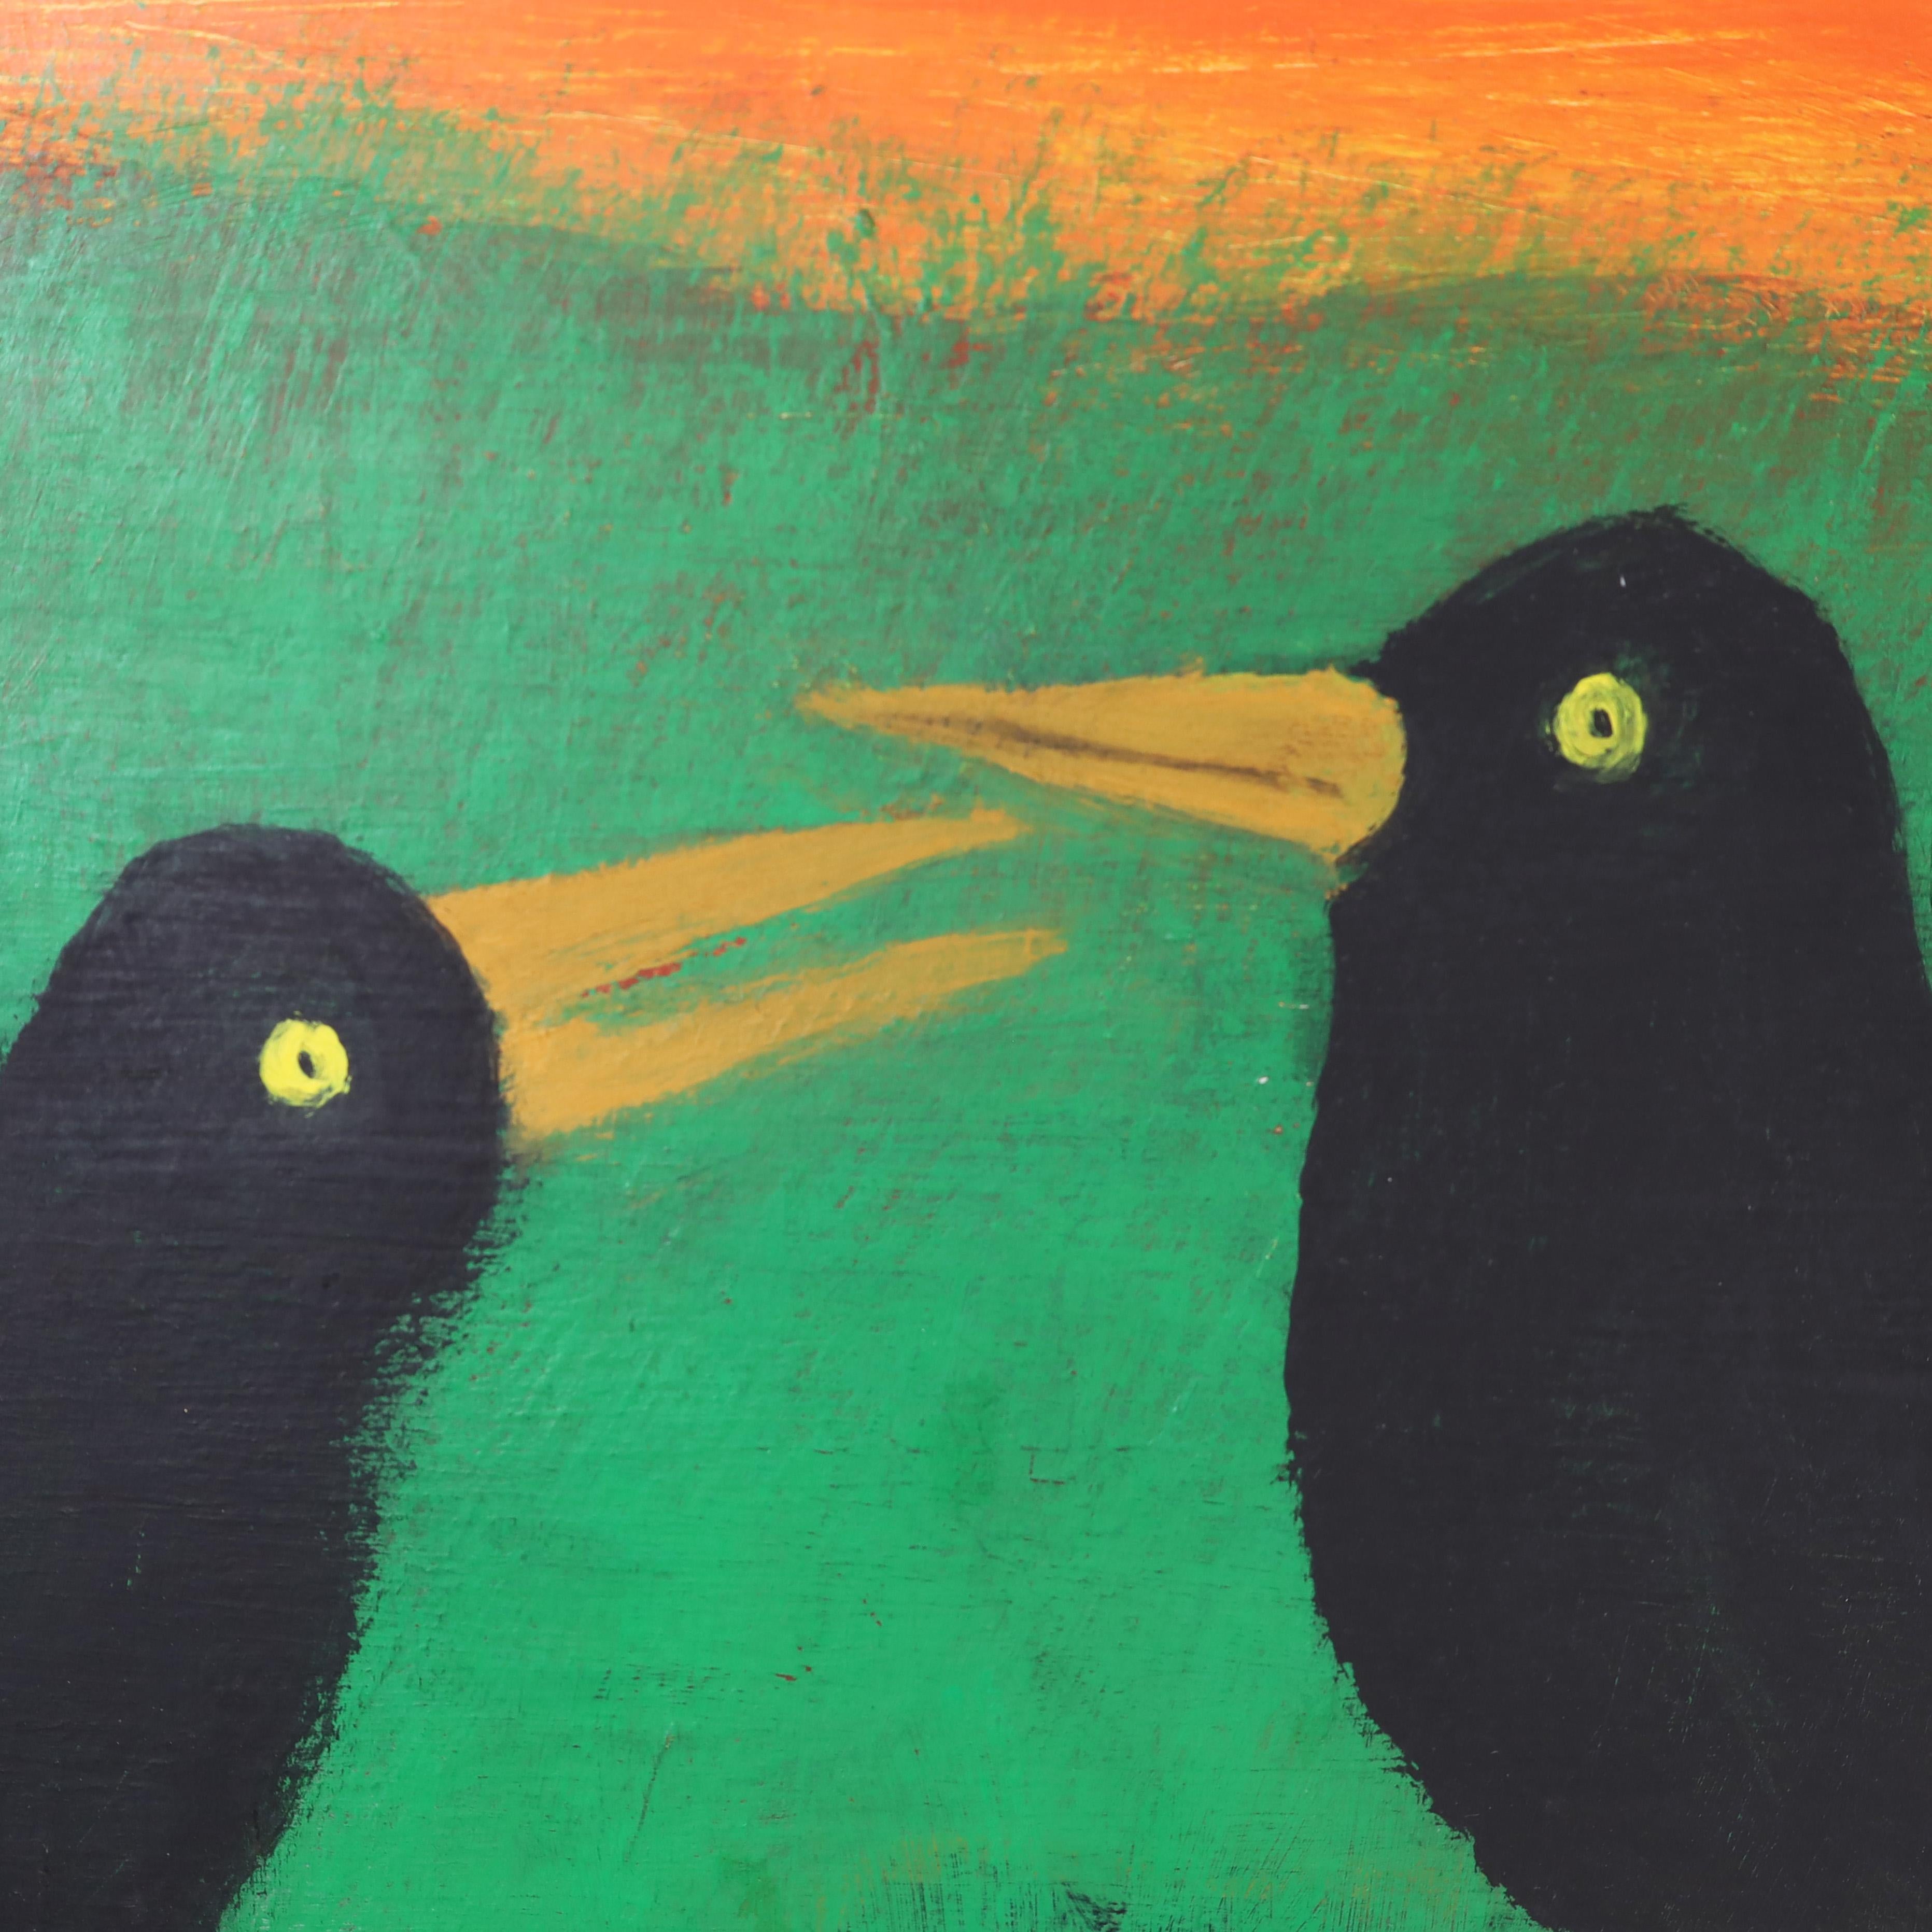 Vintage Folk Art Acrylic Painting on Board of Two Crows or Birds In Good Condition For Sale In Palm Beach, FL